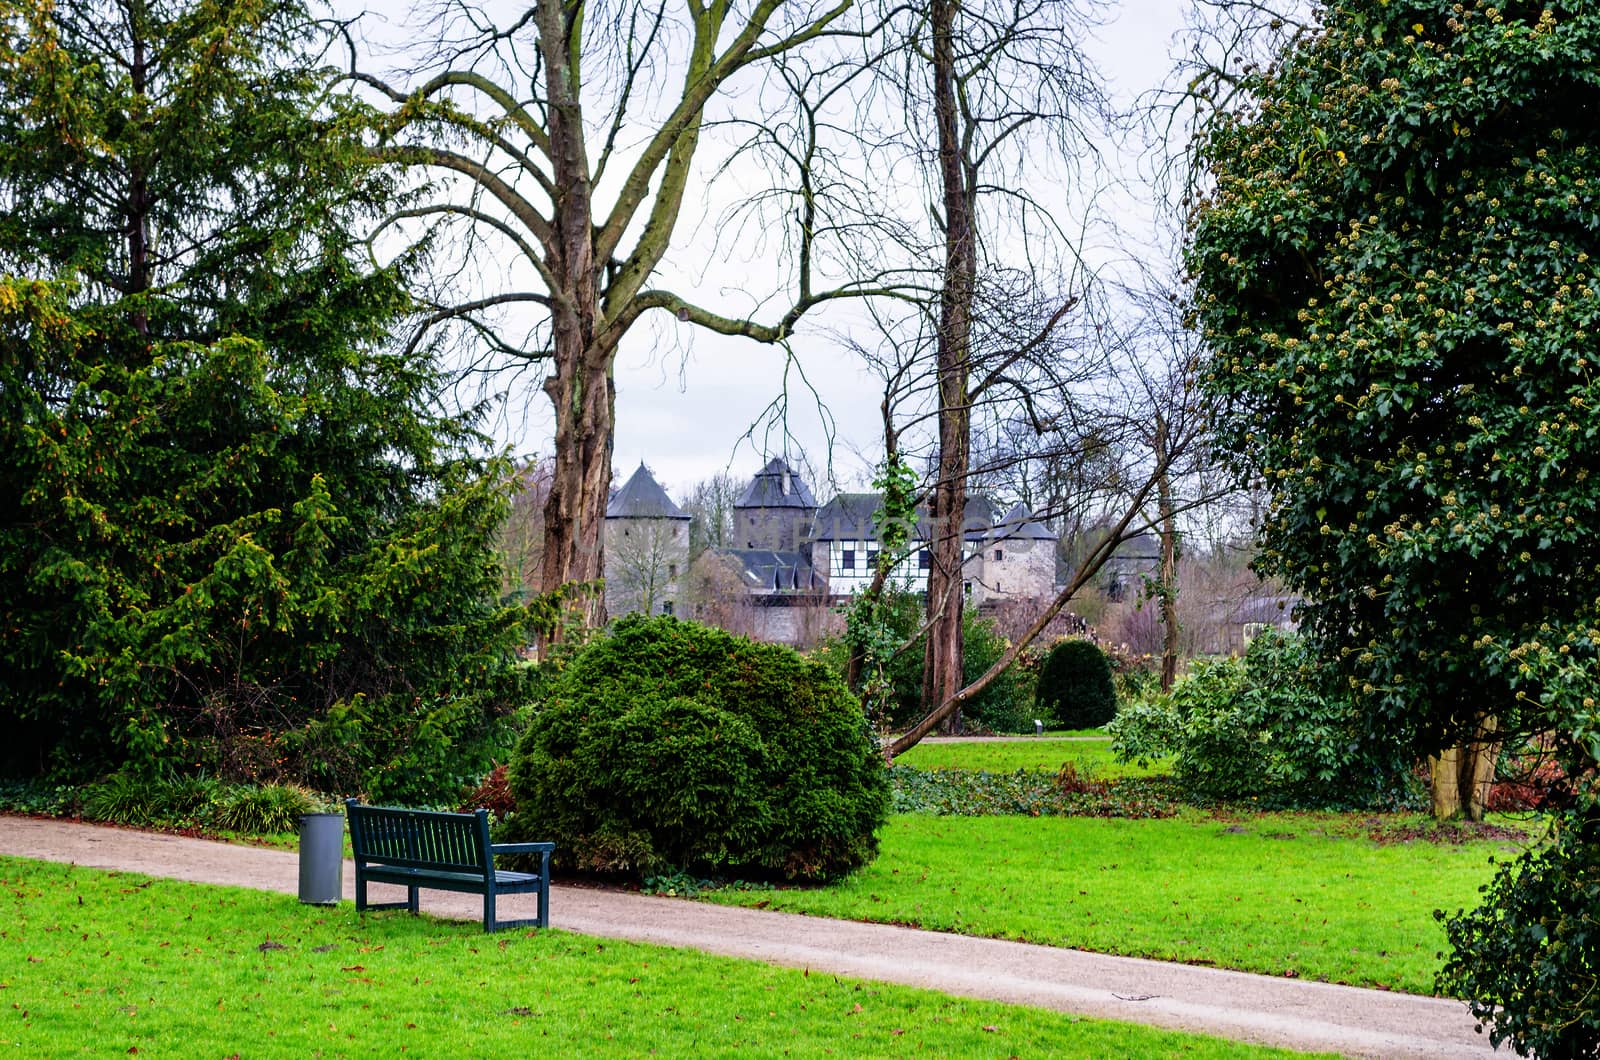 Looking into a park. In the foreground a bench, in the background a castle.